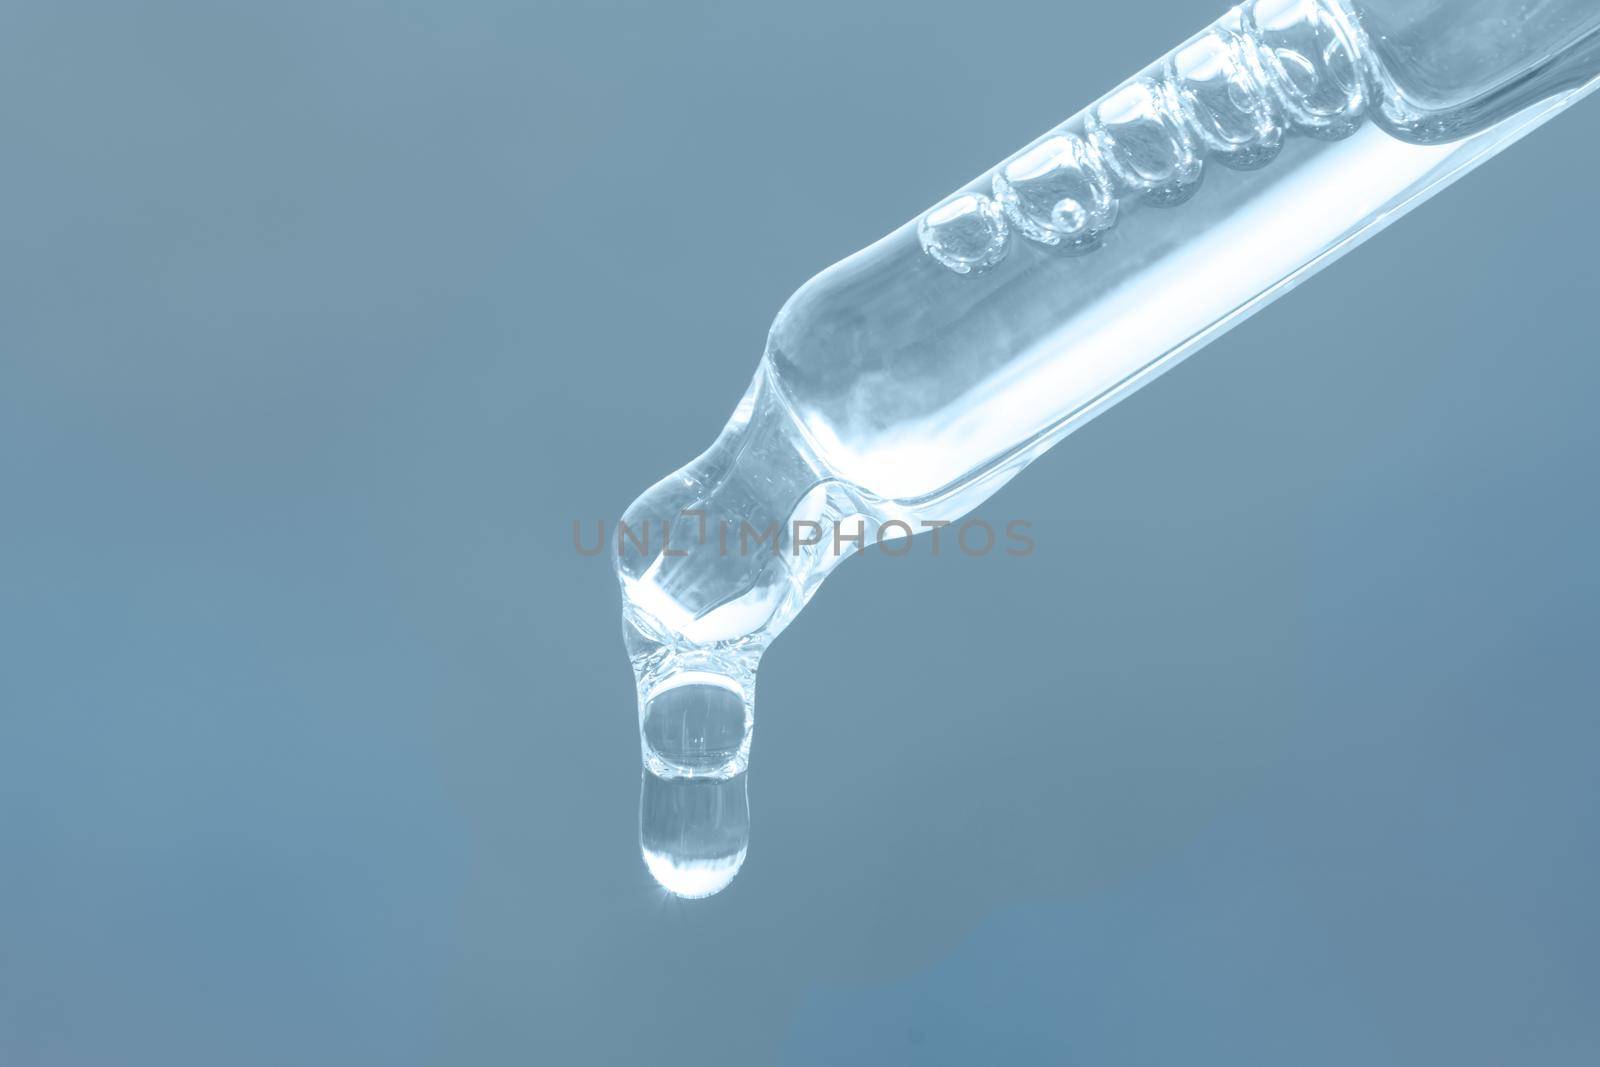 Beauty skin care product. Pipette with essential oil, serum with peptides, hyaluronic acid on blue background. Closeup of blue dropper, falling drop close up. Self care concept